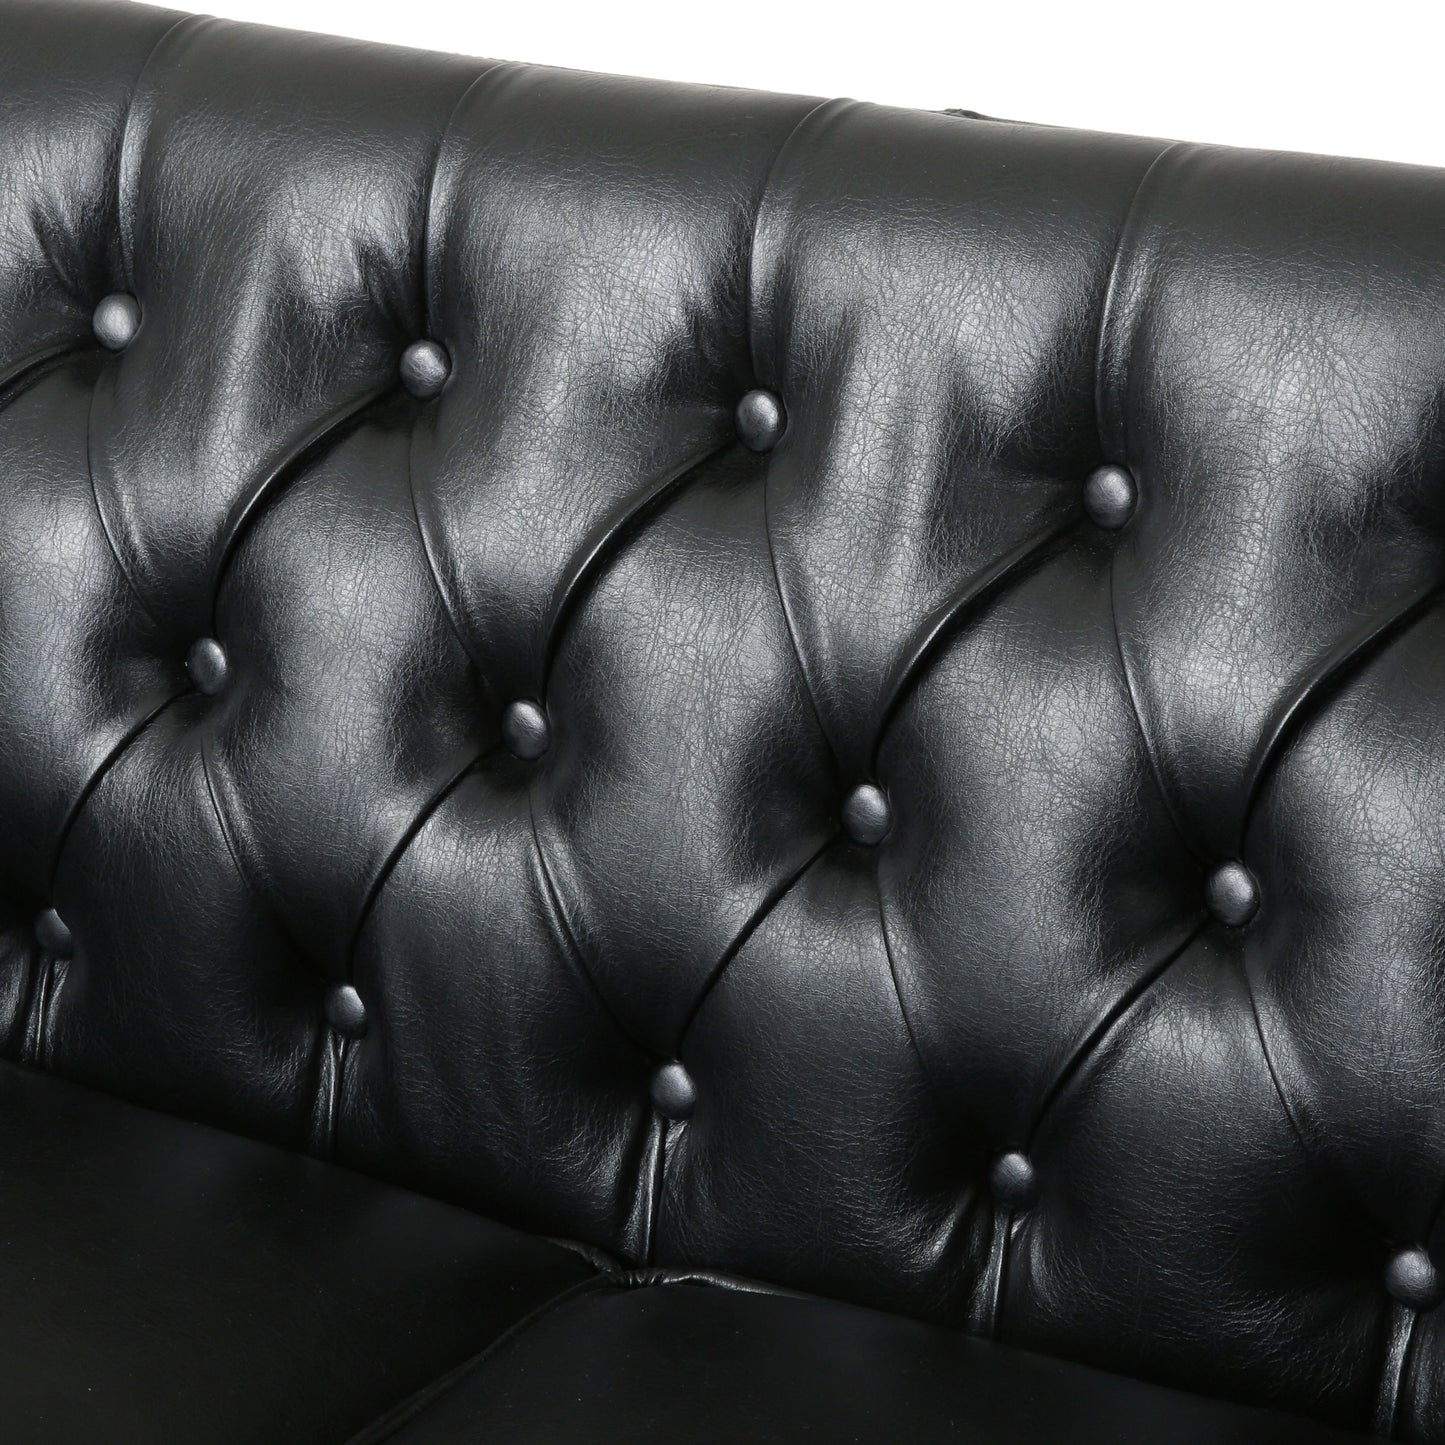 Henton Contemporary Upholstered Tufted Loveseat